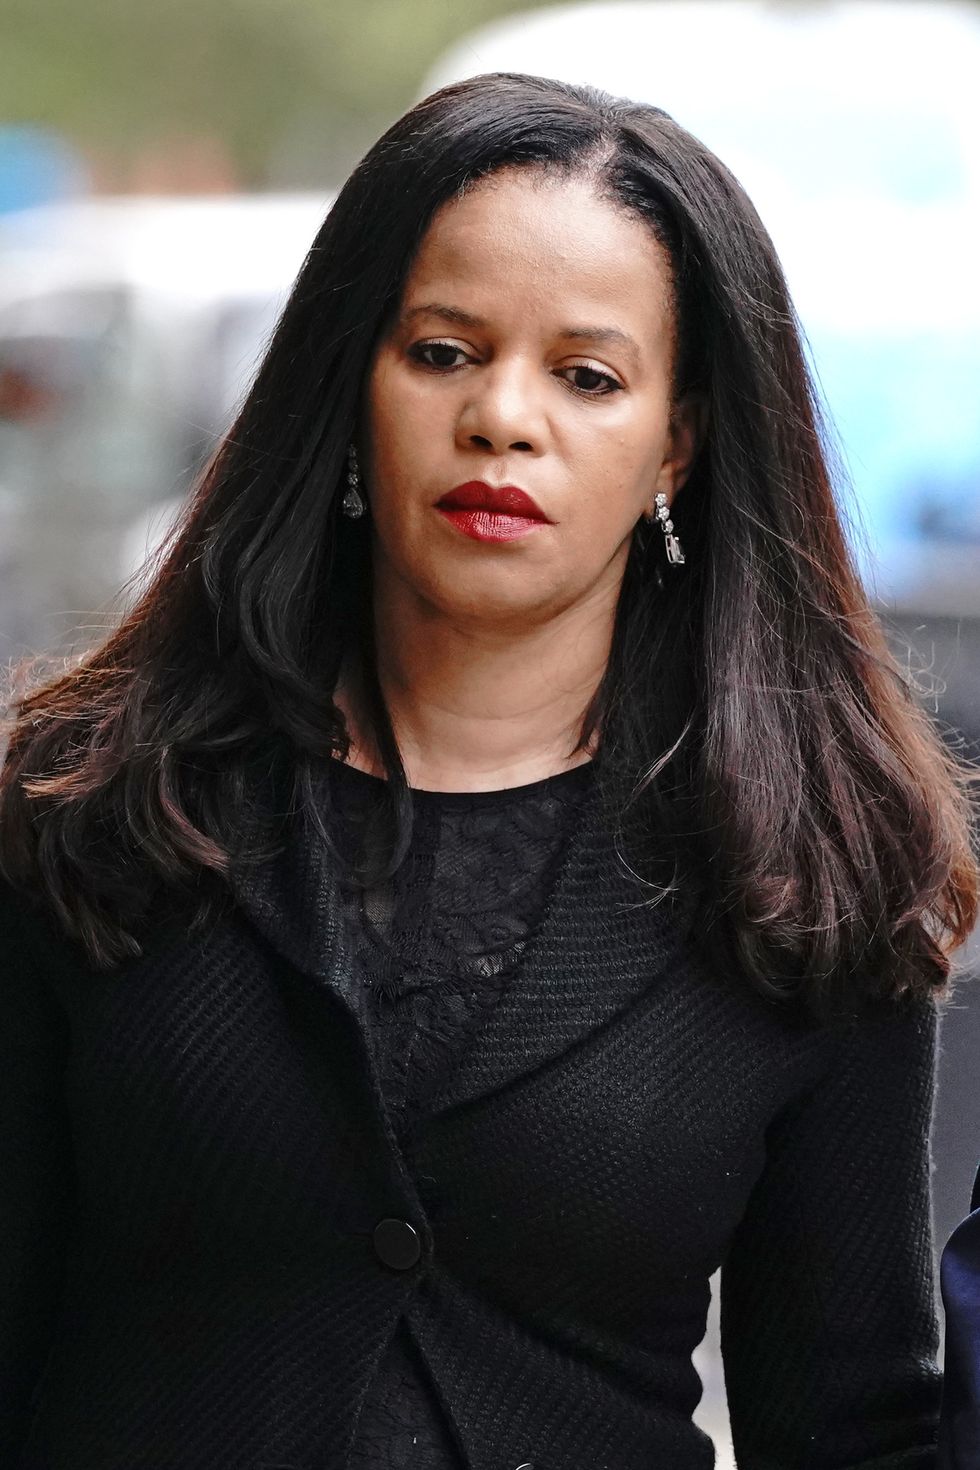 MP Claudia Webbe was handed a suspended 10-week jail term at Westminster Magistrates Court, London.